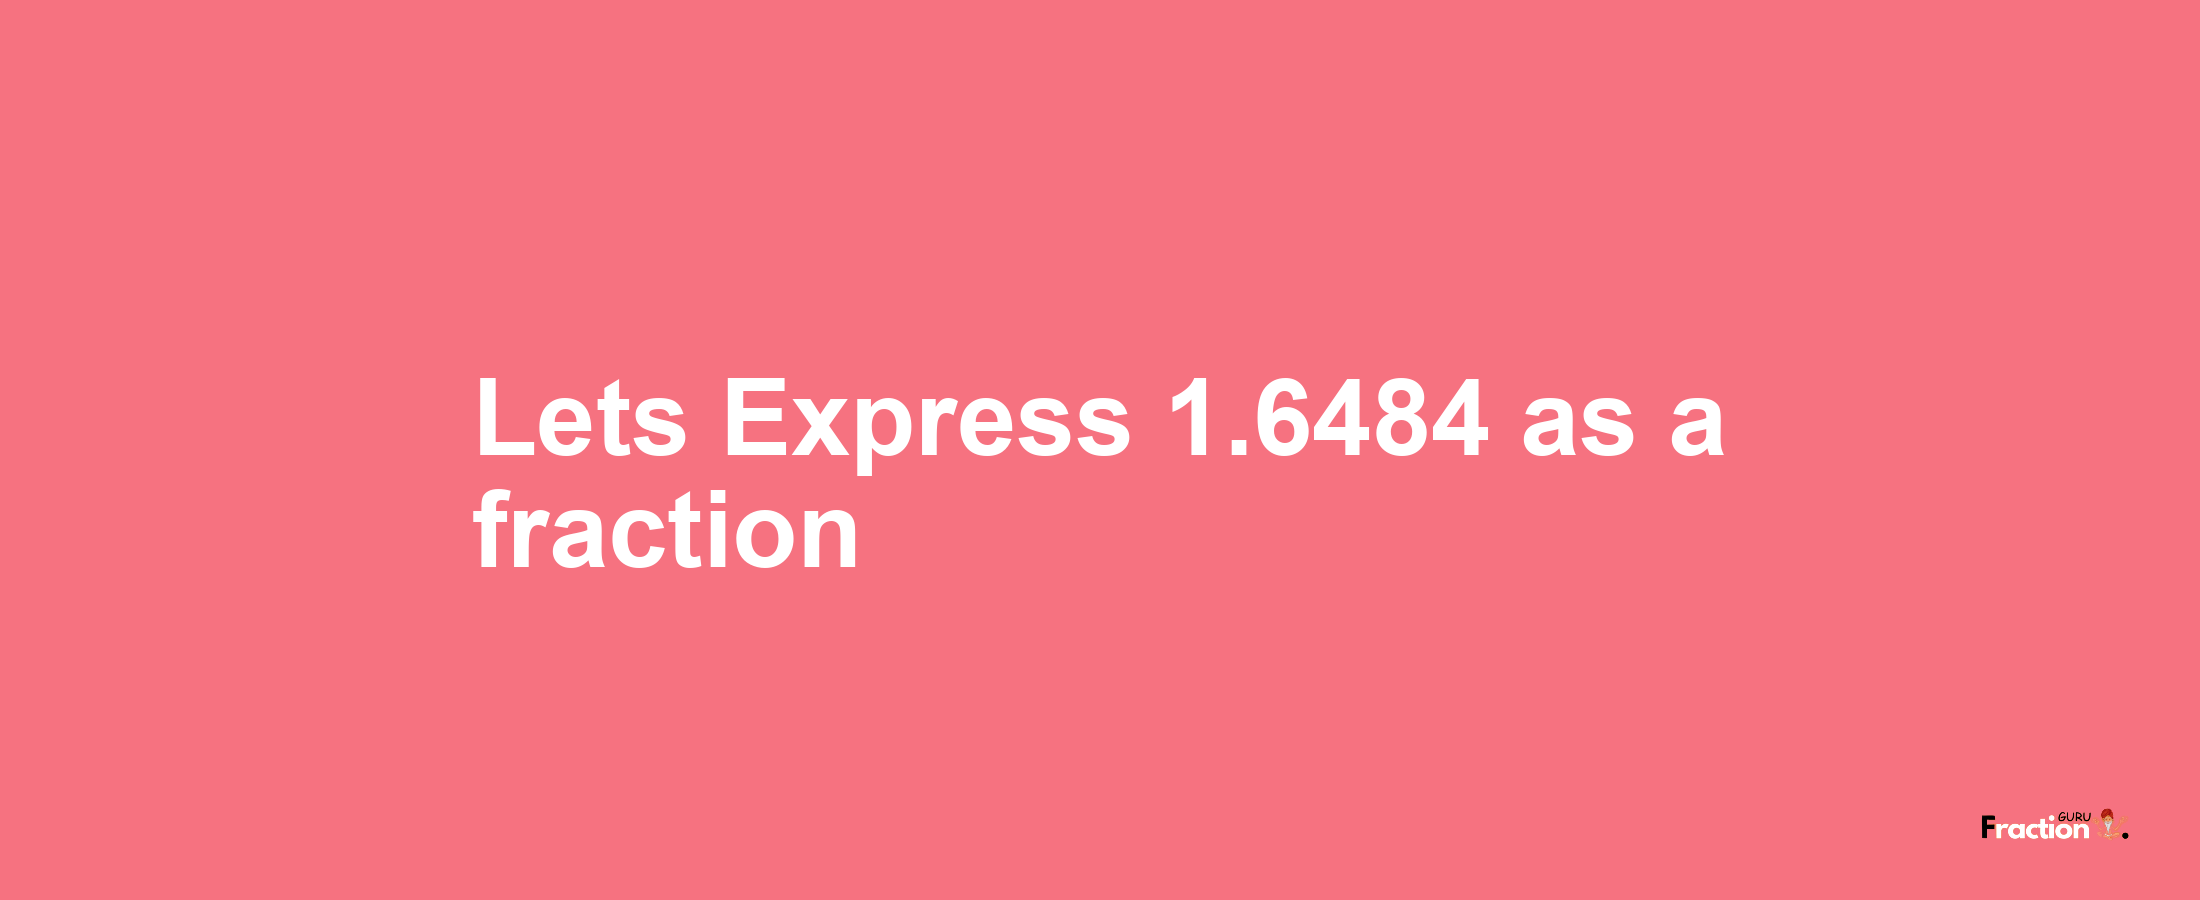 Lets Express 1.6484 as afraction